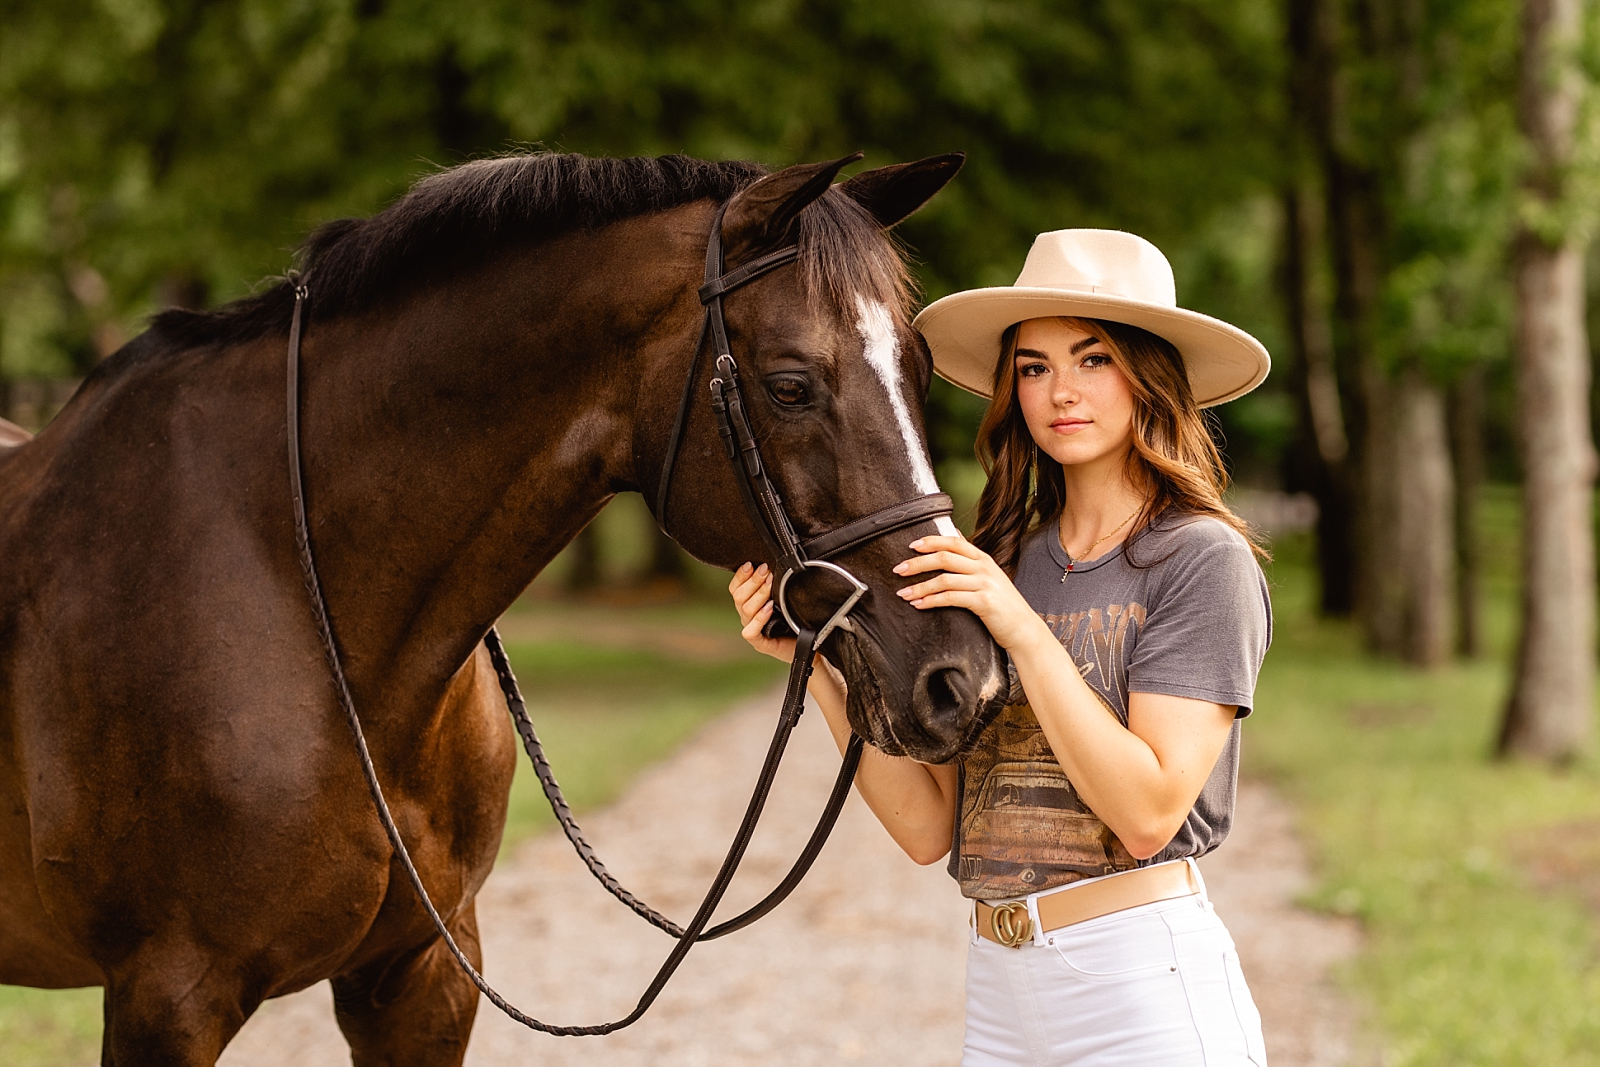 Cute photos of horse and rider taken at Fox Lake Farm in Birmingham, Alabama by professional equine photographer.